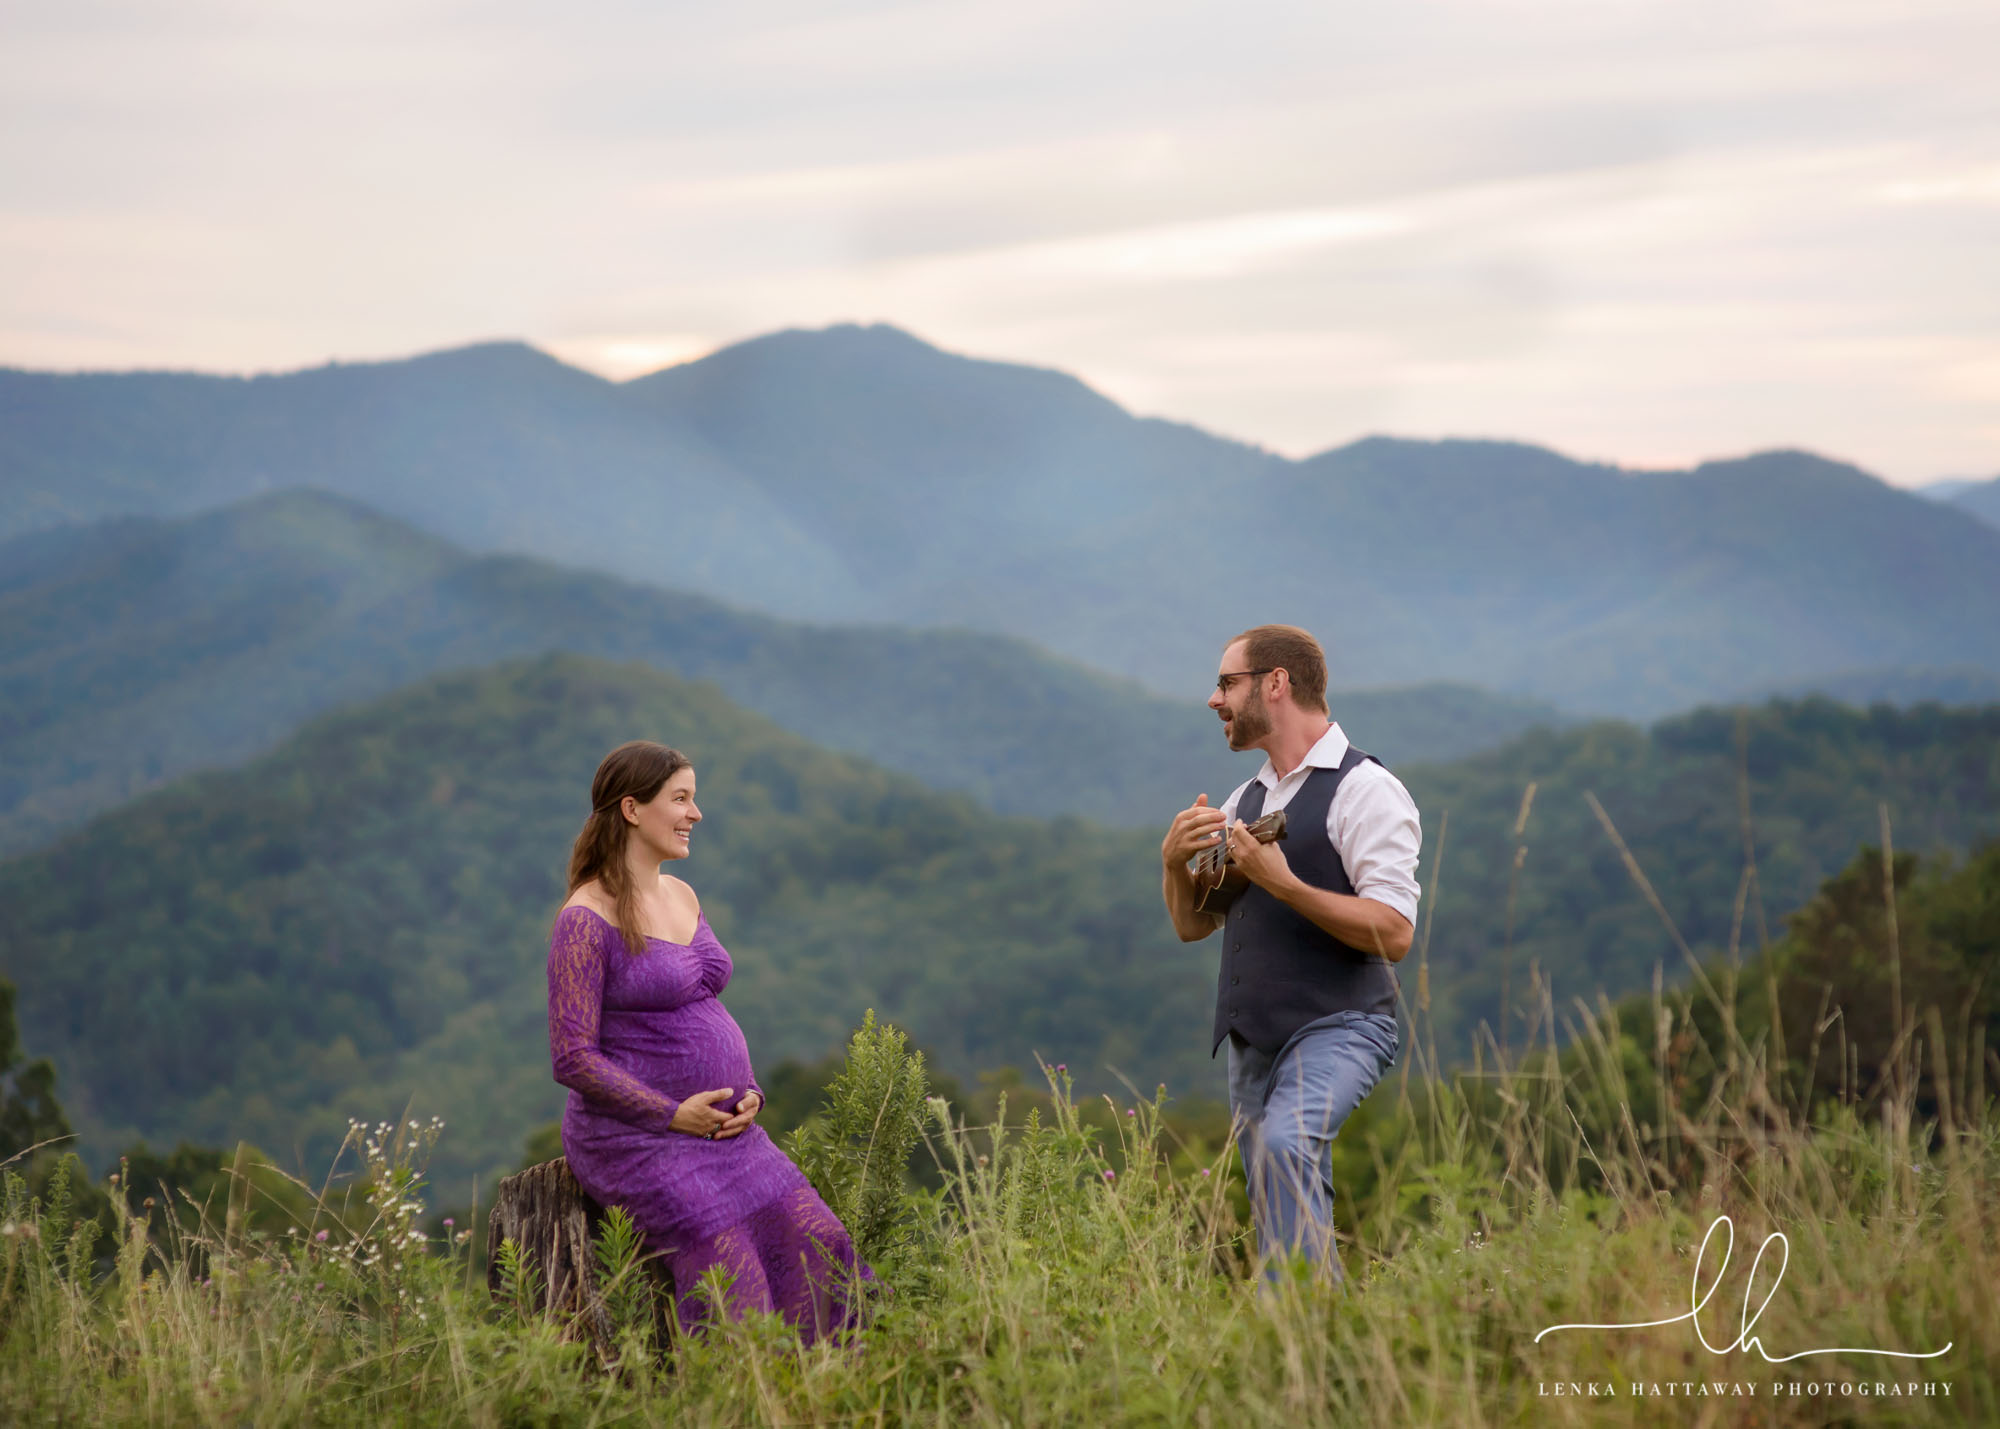 Pregancy picture of a couple with mountains in the background.